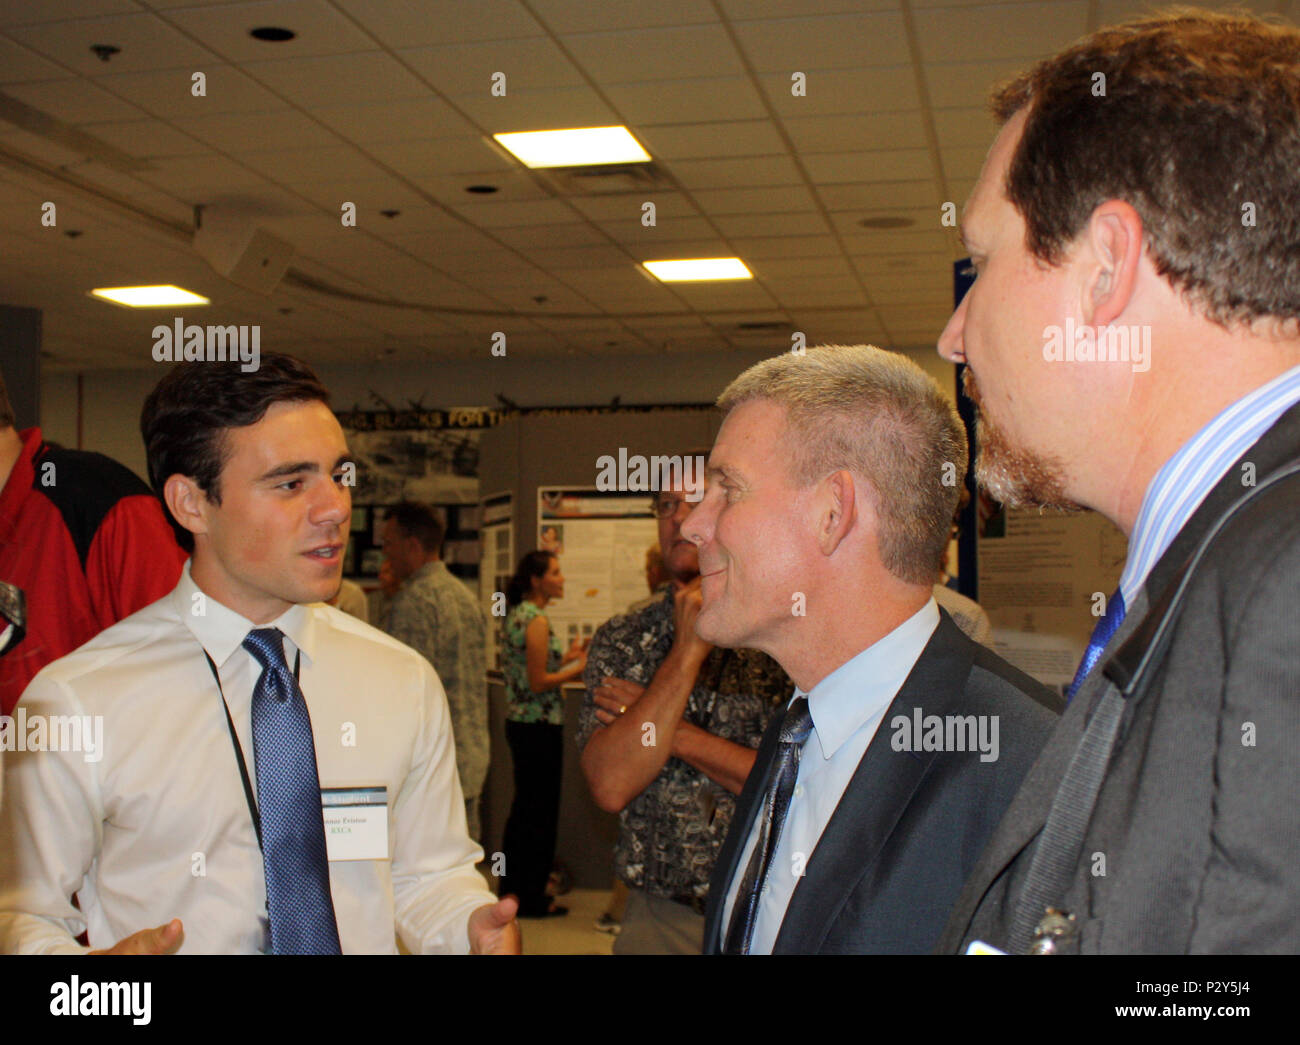 WRIGHT-PATTERSON AFB, Ohio – Thomas Lockhart (center), Director, AFRL Materials and Manufacturing Directorate, and Chad Watchorn (right), Executive Director, Regional STEM Collaborative, speak with intern Connor Eviston, an undergraduate student from the University of Cincinnati, during the 2016 RX Summer Student Poster Session, Aug. 5. Eviston researched nondestructive evaluation and thermal signals for impact-damaged polymer matrix composites this summer. Stock Photo